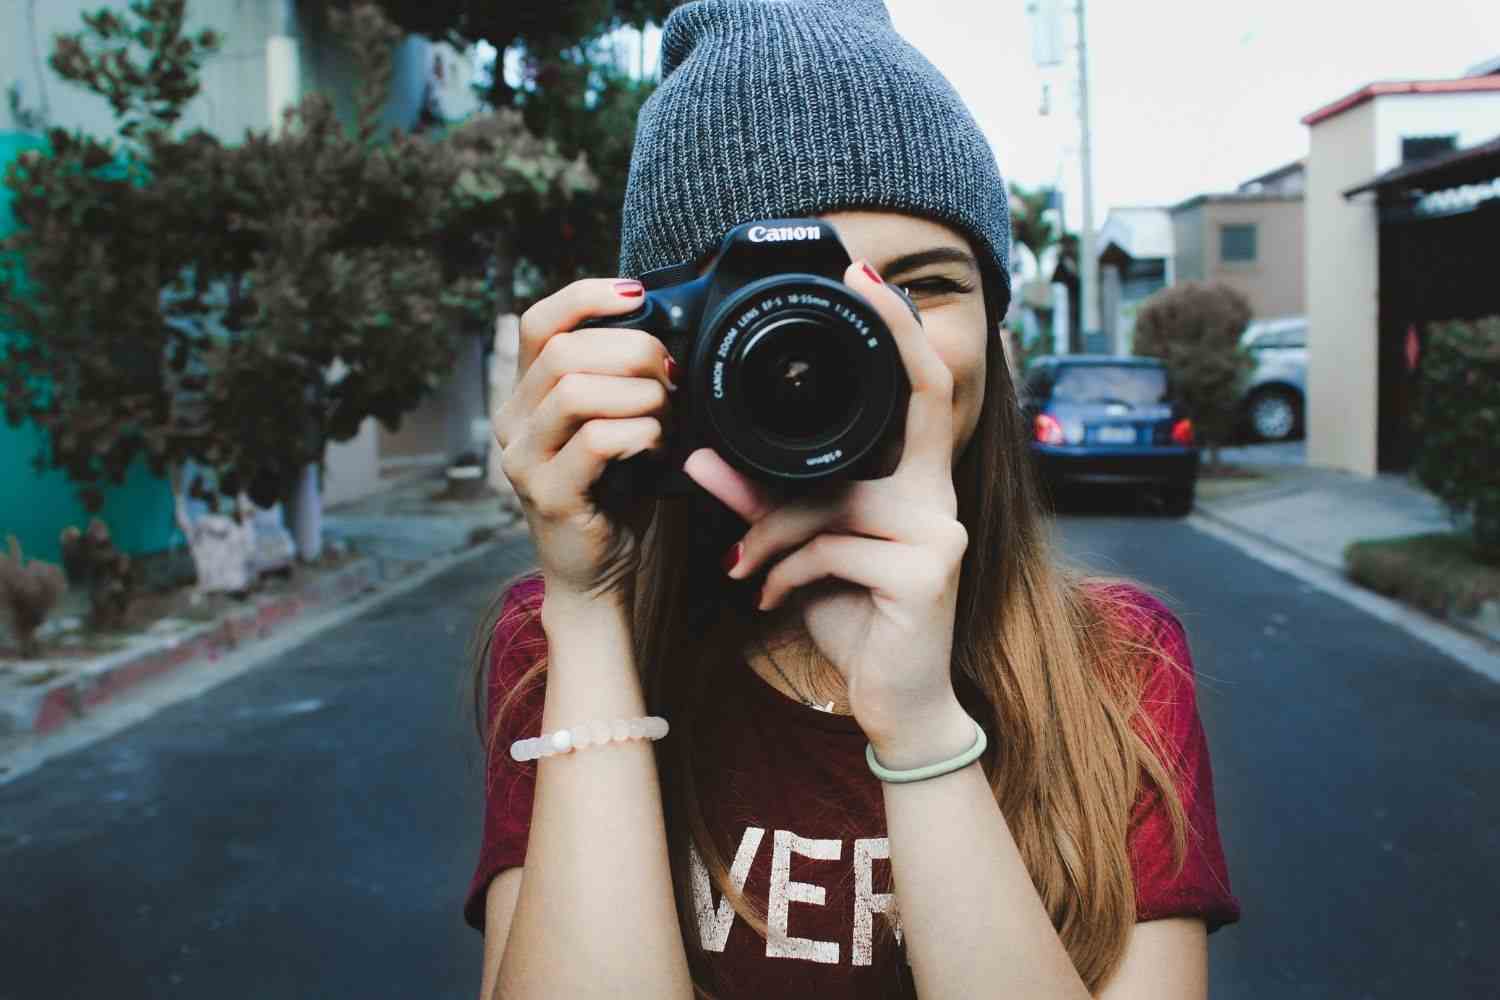 a smiling woman is taking photos with a camera Photo by Max Panam on unsplash